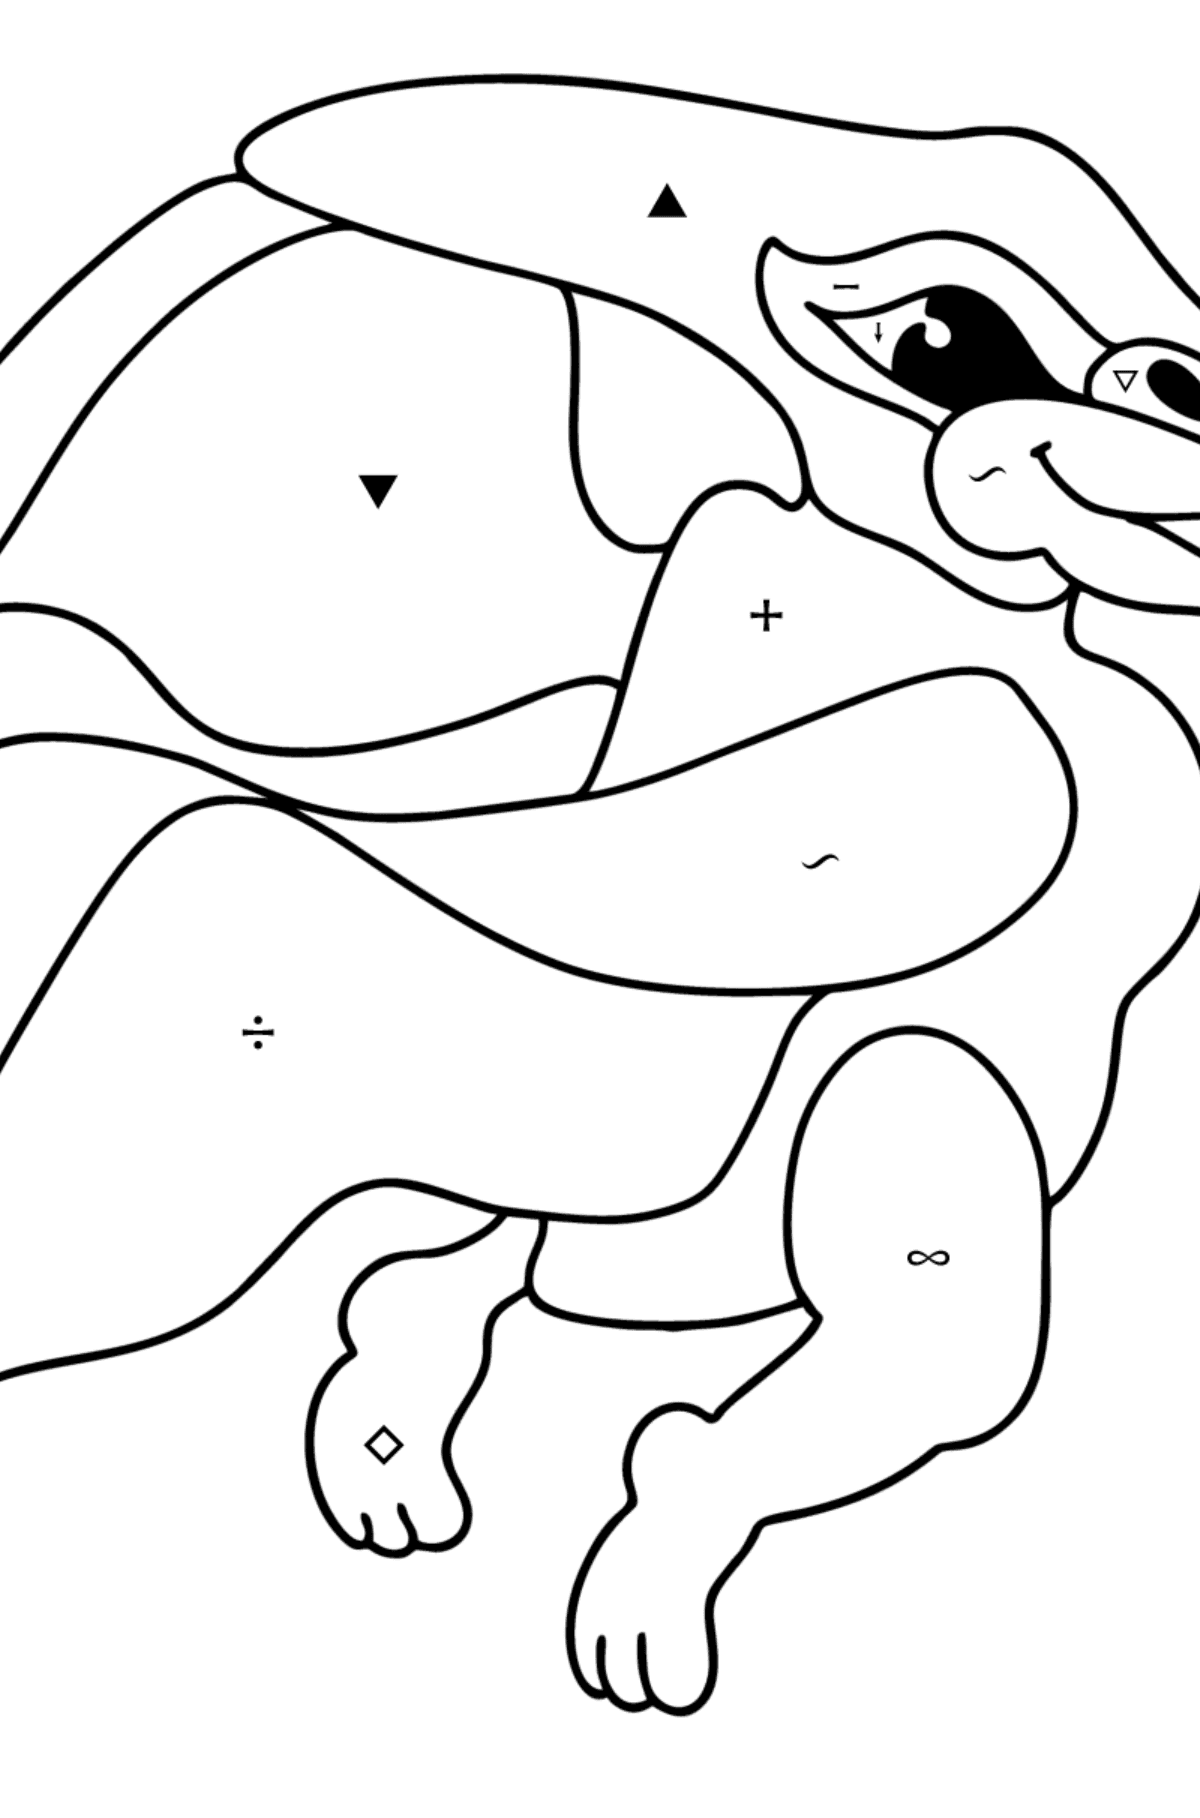 Pteranodon coloring page - Coloring by Symbols for Kids